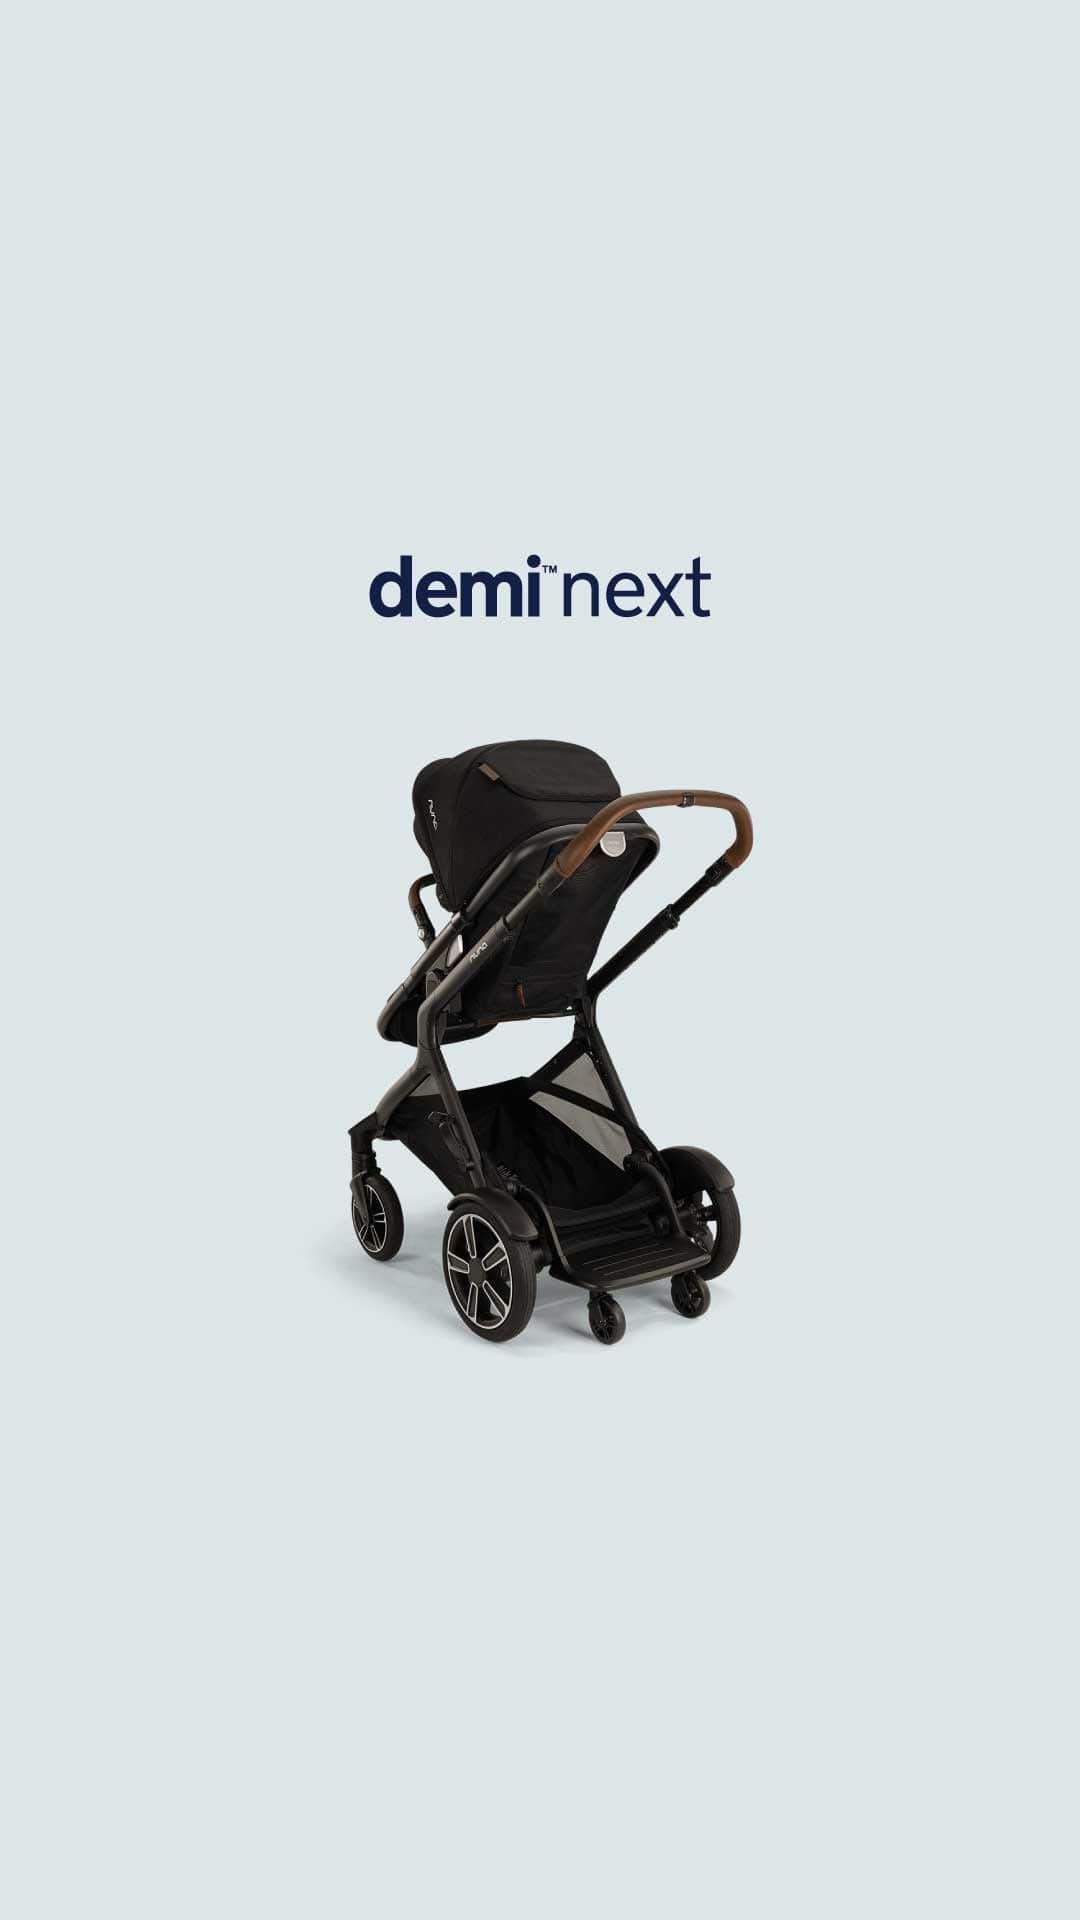 nunaのインスタグラム：「IT’S HERE ✨ Introducing the DEMI next stroller ✨ Possibilities for your future and options for your every day 🥰 With 25+ modes, an extra-large basket, AND a rider board, it has everything you need plus everything you didn’t know you needed 🤩    Drop a 💖 if you’re excited about this next-level stroller.  #levelup #nuna #deminext #nextlevelpossibilities #stroller #familygoals #family」